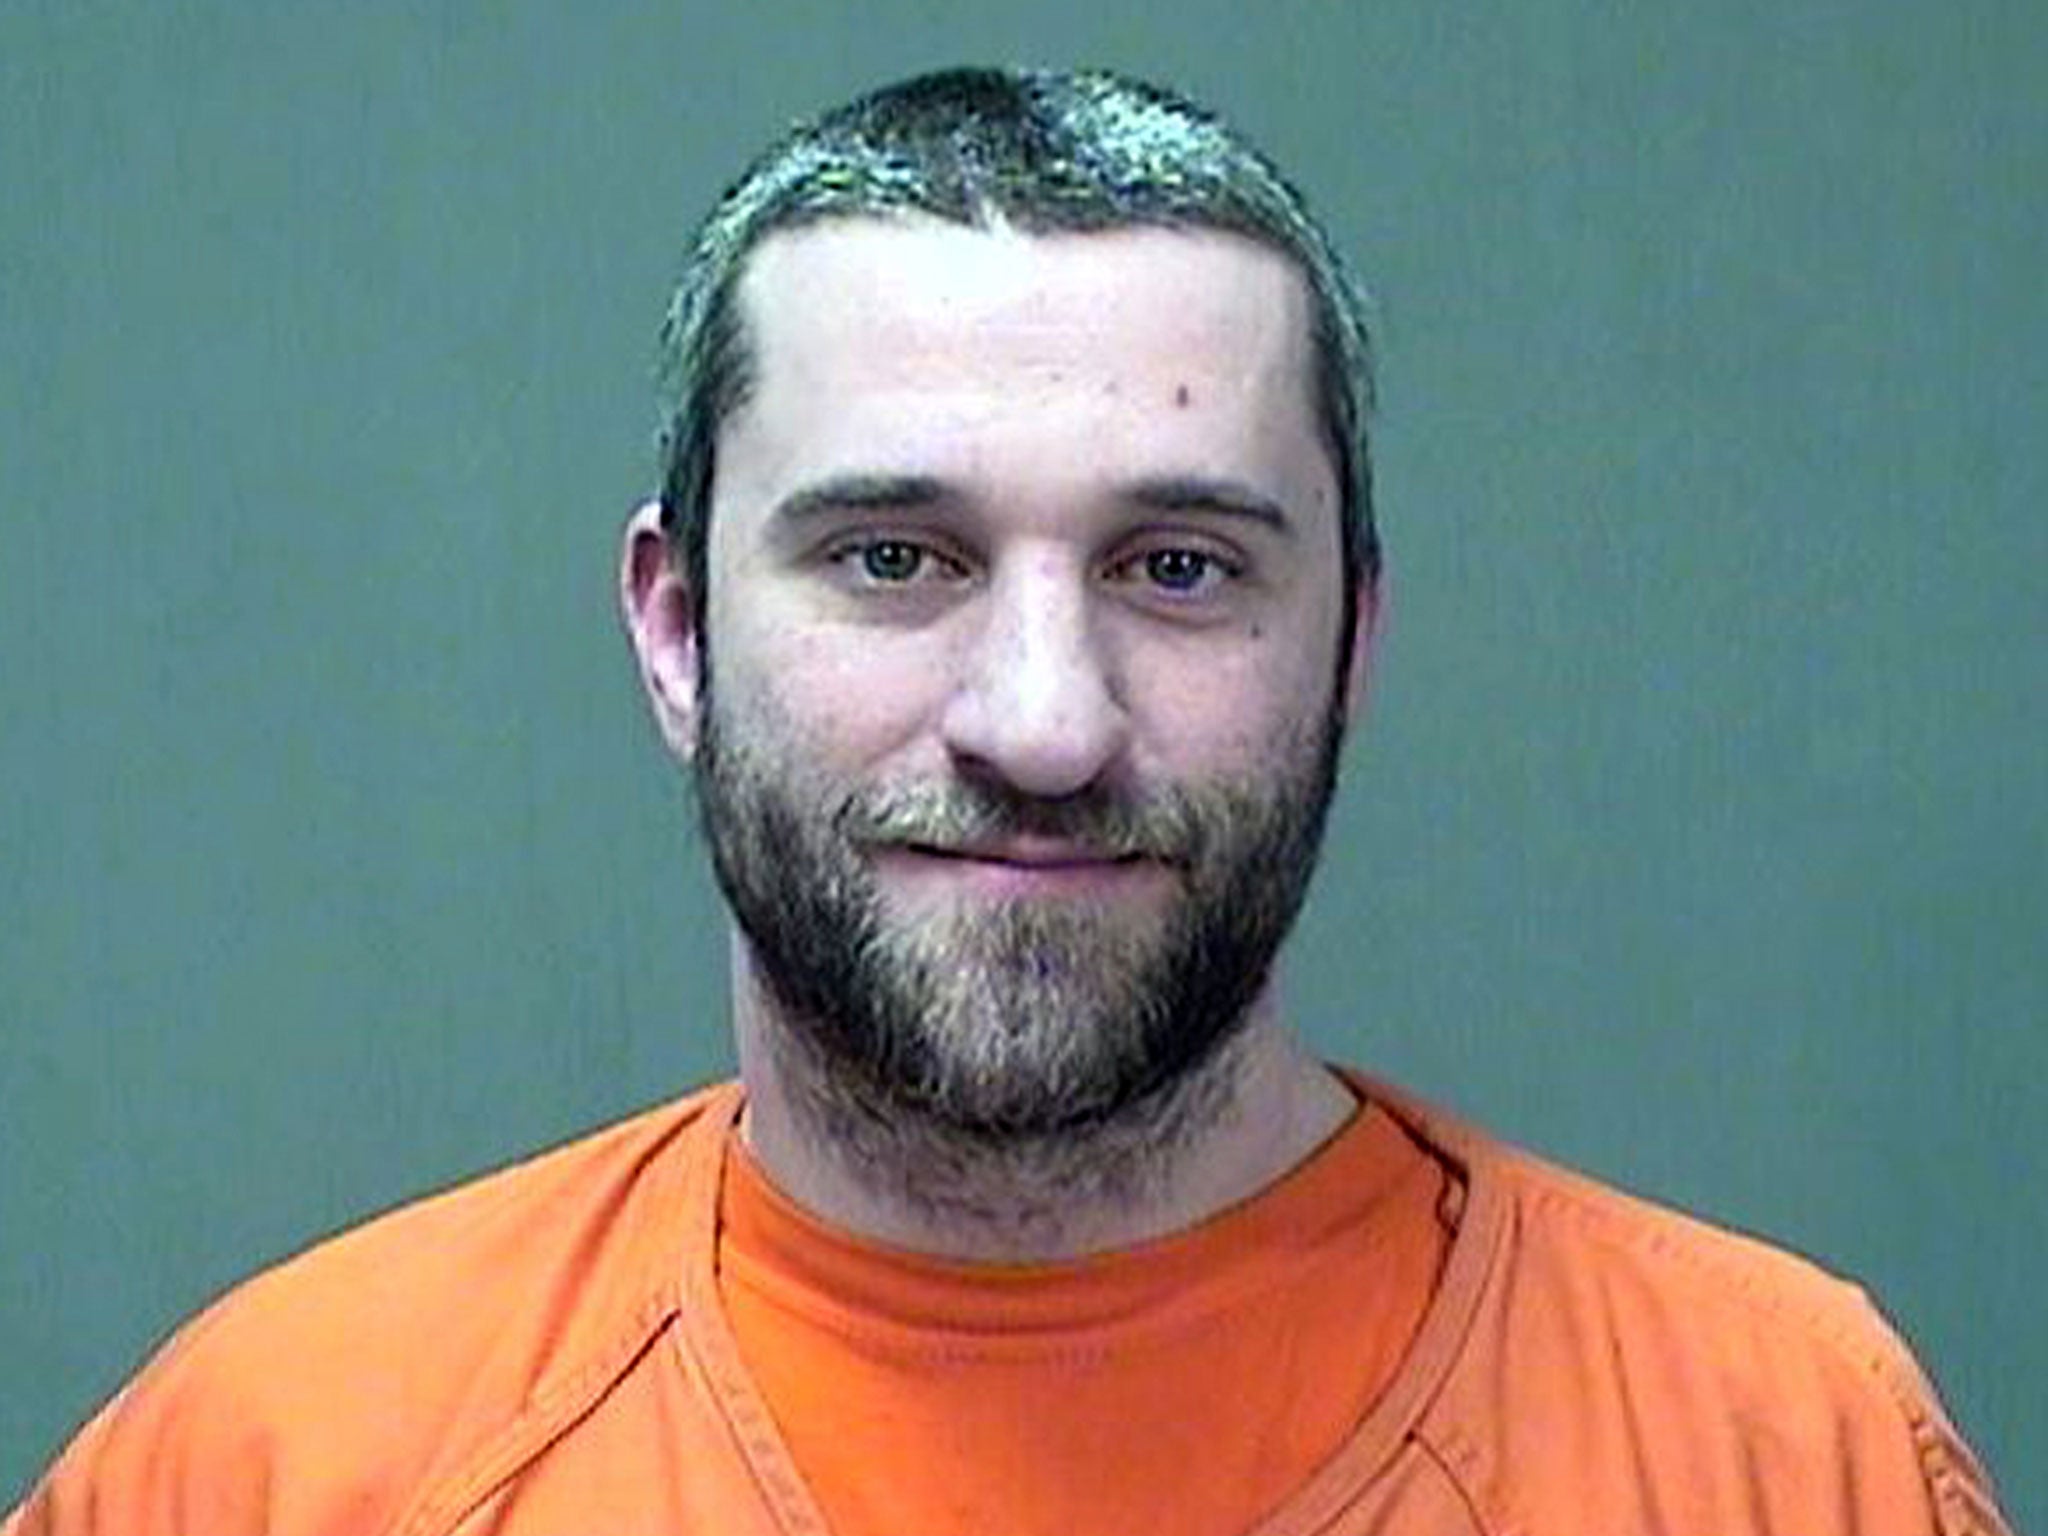 The official police photograph of Dustin Diamond taken after he was arrested in Wisconsin